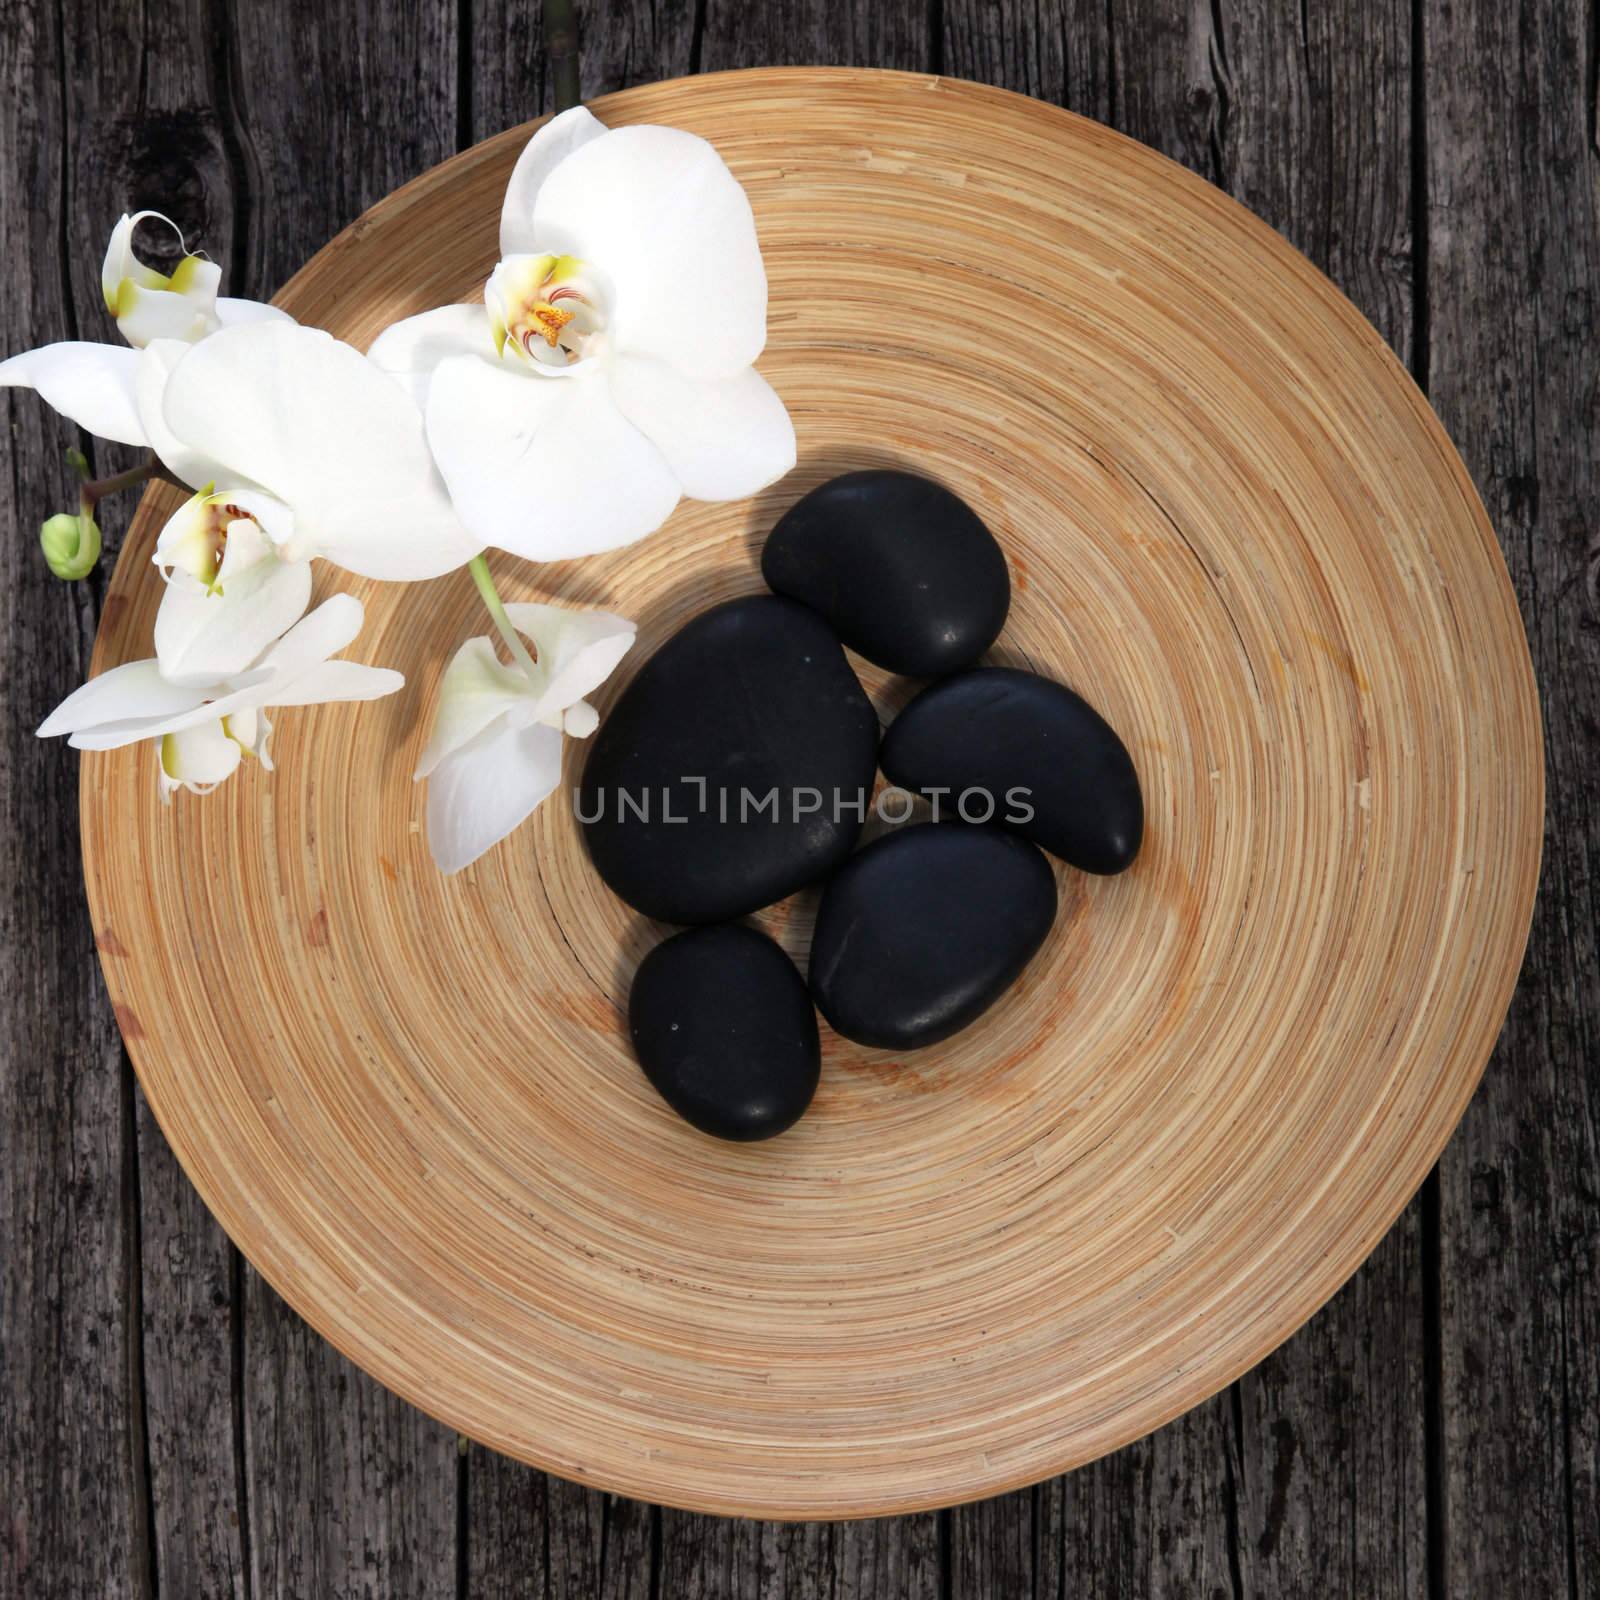 Overhead view of smooth black basalt massage stones in a pottery bowl with integral concentric patterning with fresh white flowers for an unusual spa background